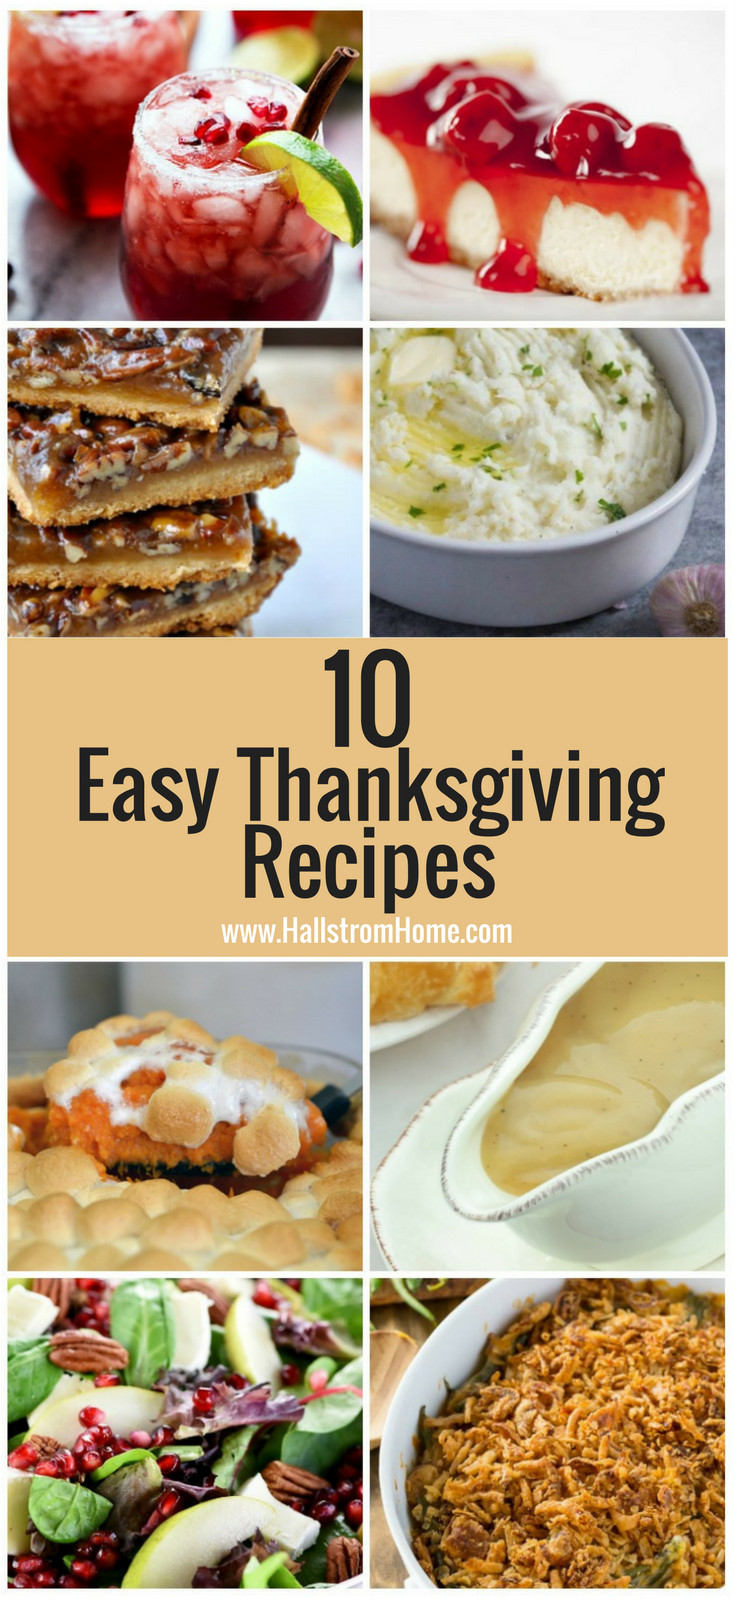 Quick And Easy Thanksgiving Recipes
 10 Quick and Easy Thanksgiving Recipes Hallstrom Home